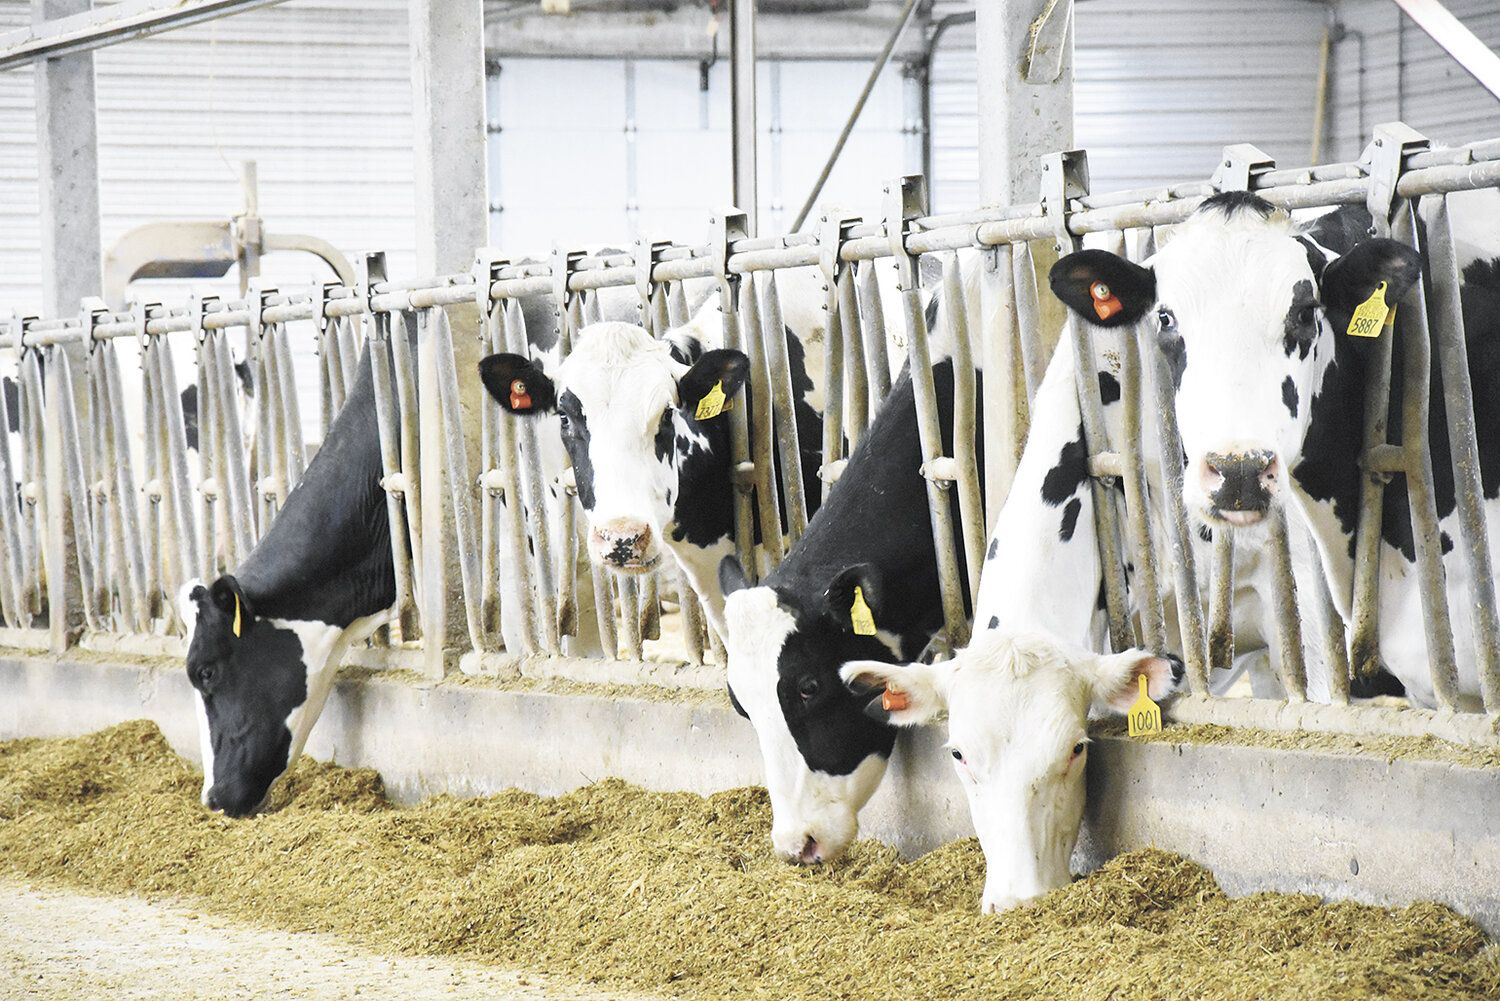 Cows eat a total mixed ration Feb. 5 in the freestall barn at Blumenfeld Holsteins near Hawley, Minnesota. The dairy uses brown mid-rib corn silage in their ration.